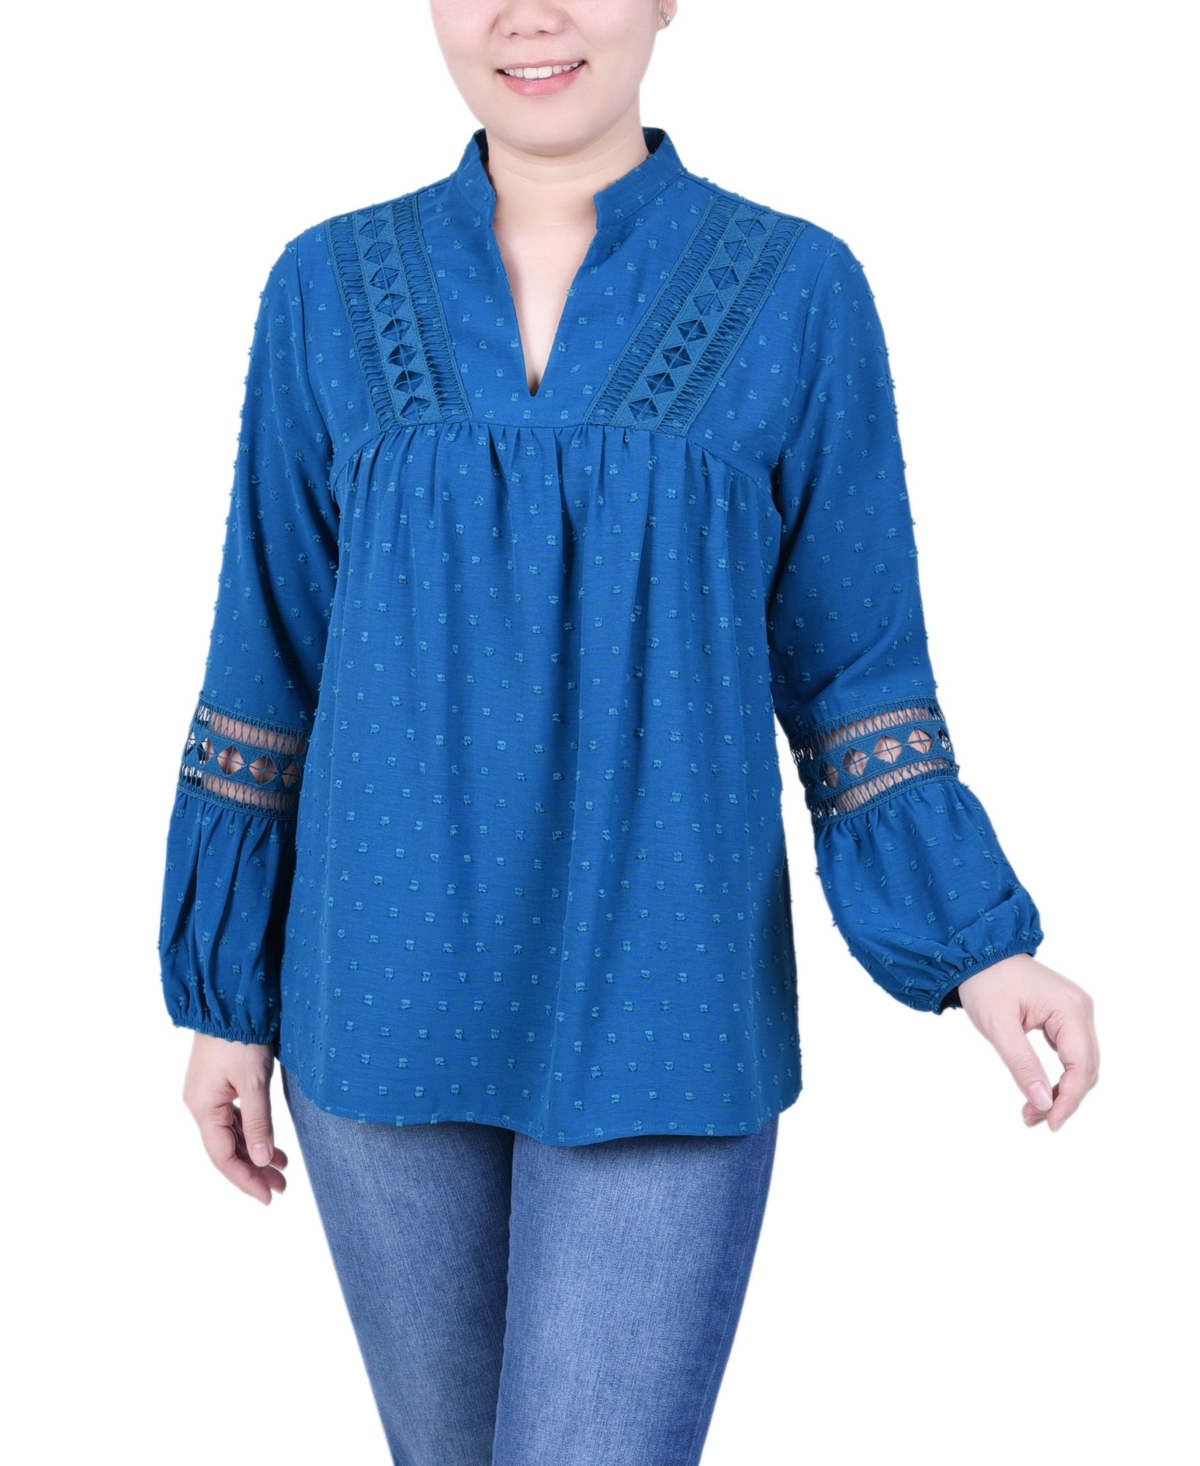 NY COLLECTION WOMEN'S LONG SLEEVE BLOUSE WITH CROCHET TRIM